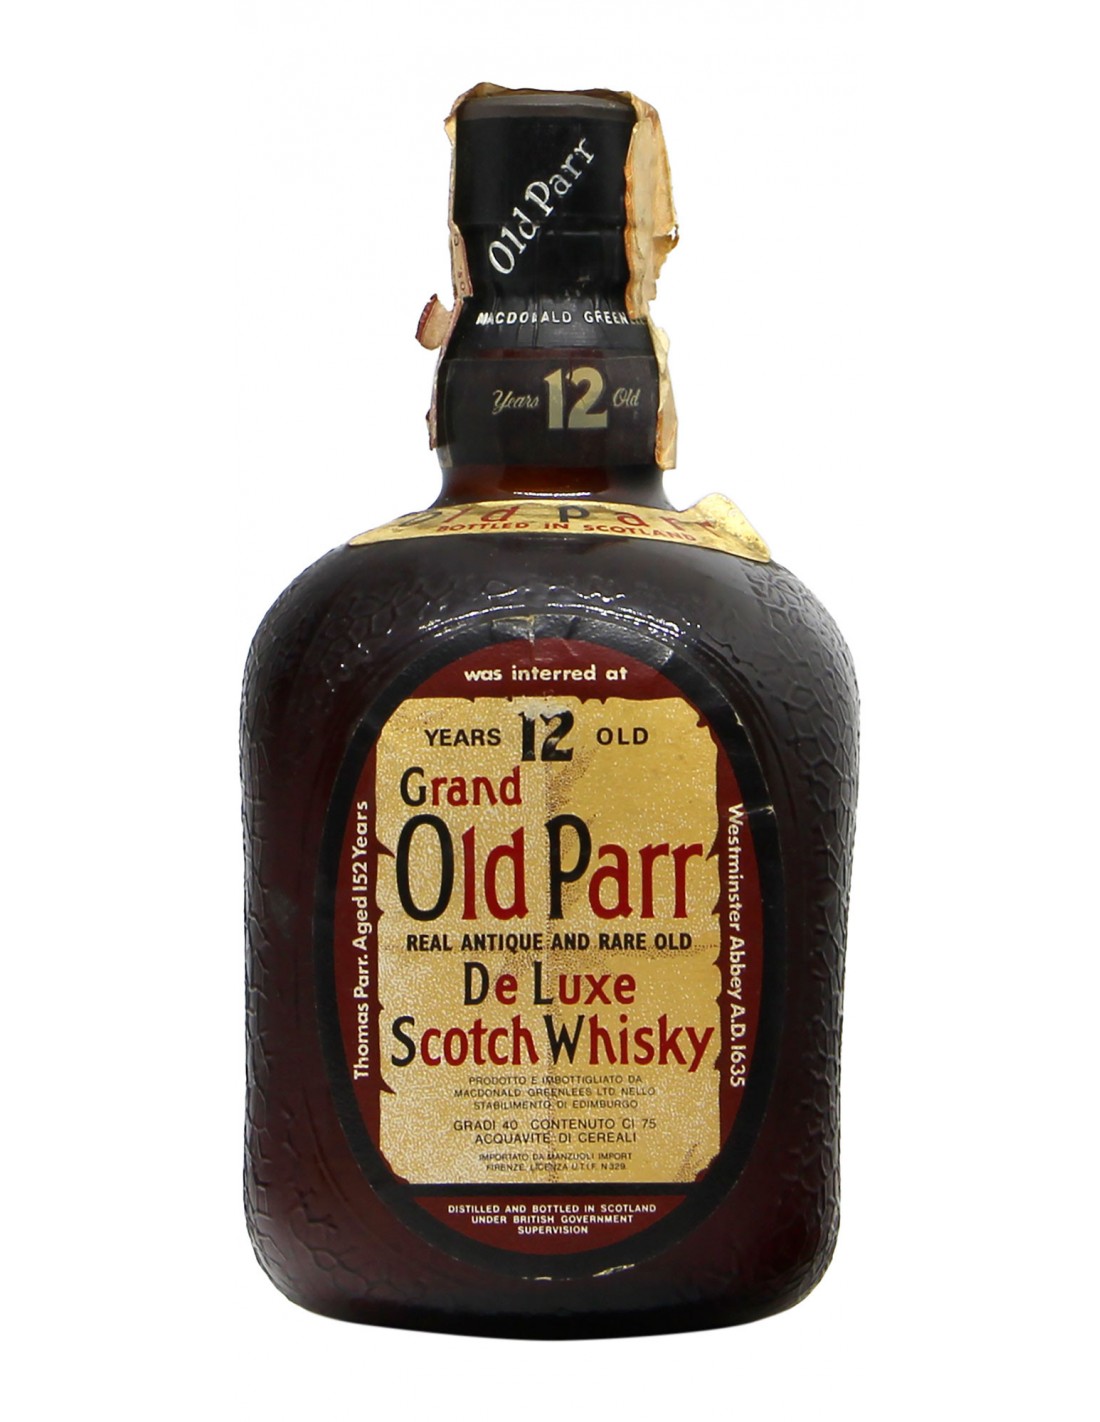 Old grand's. Old Parr виски. Old Parr купить.